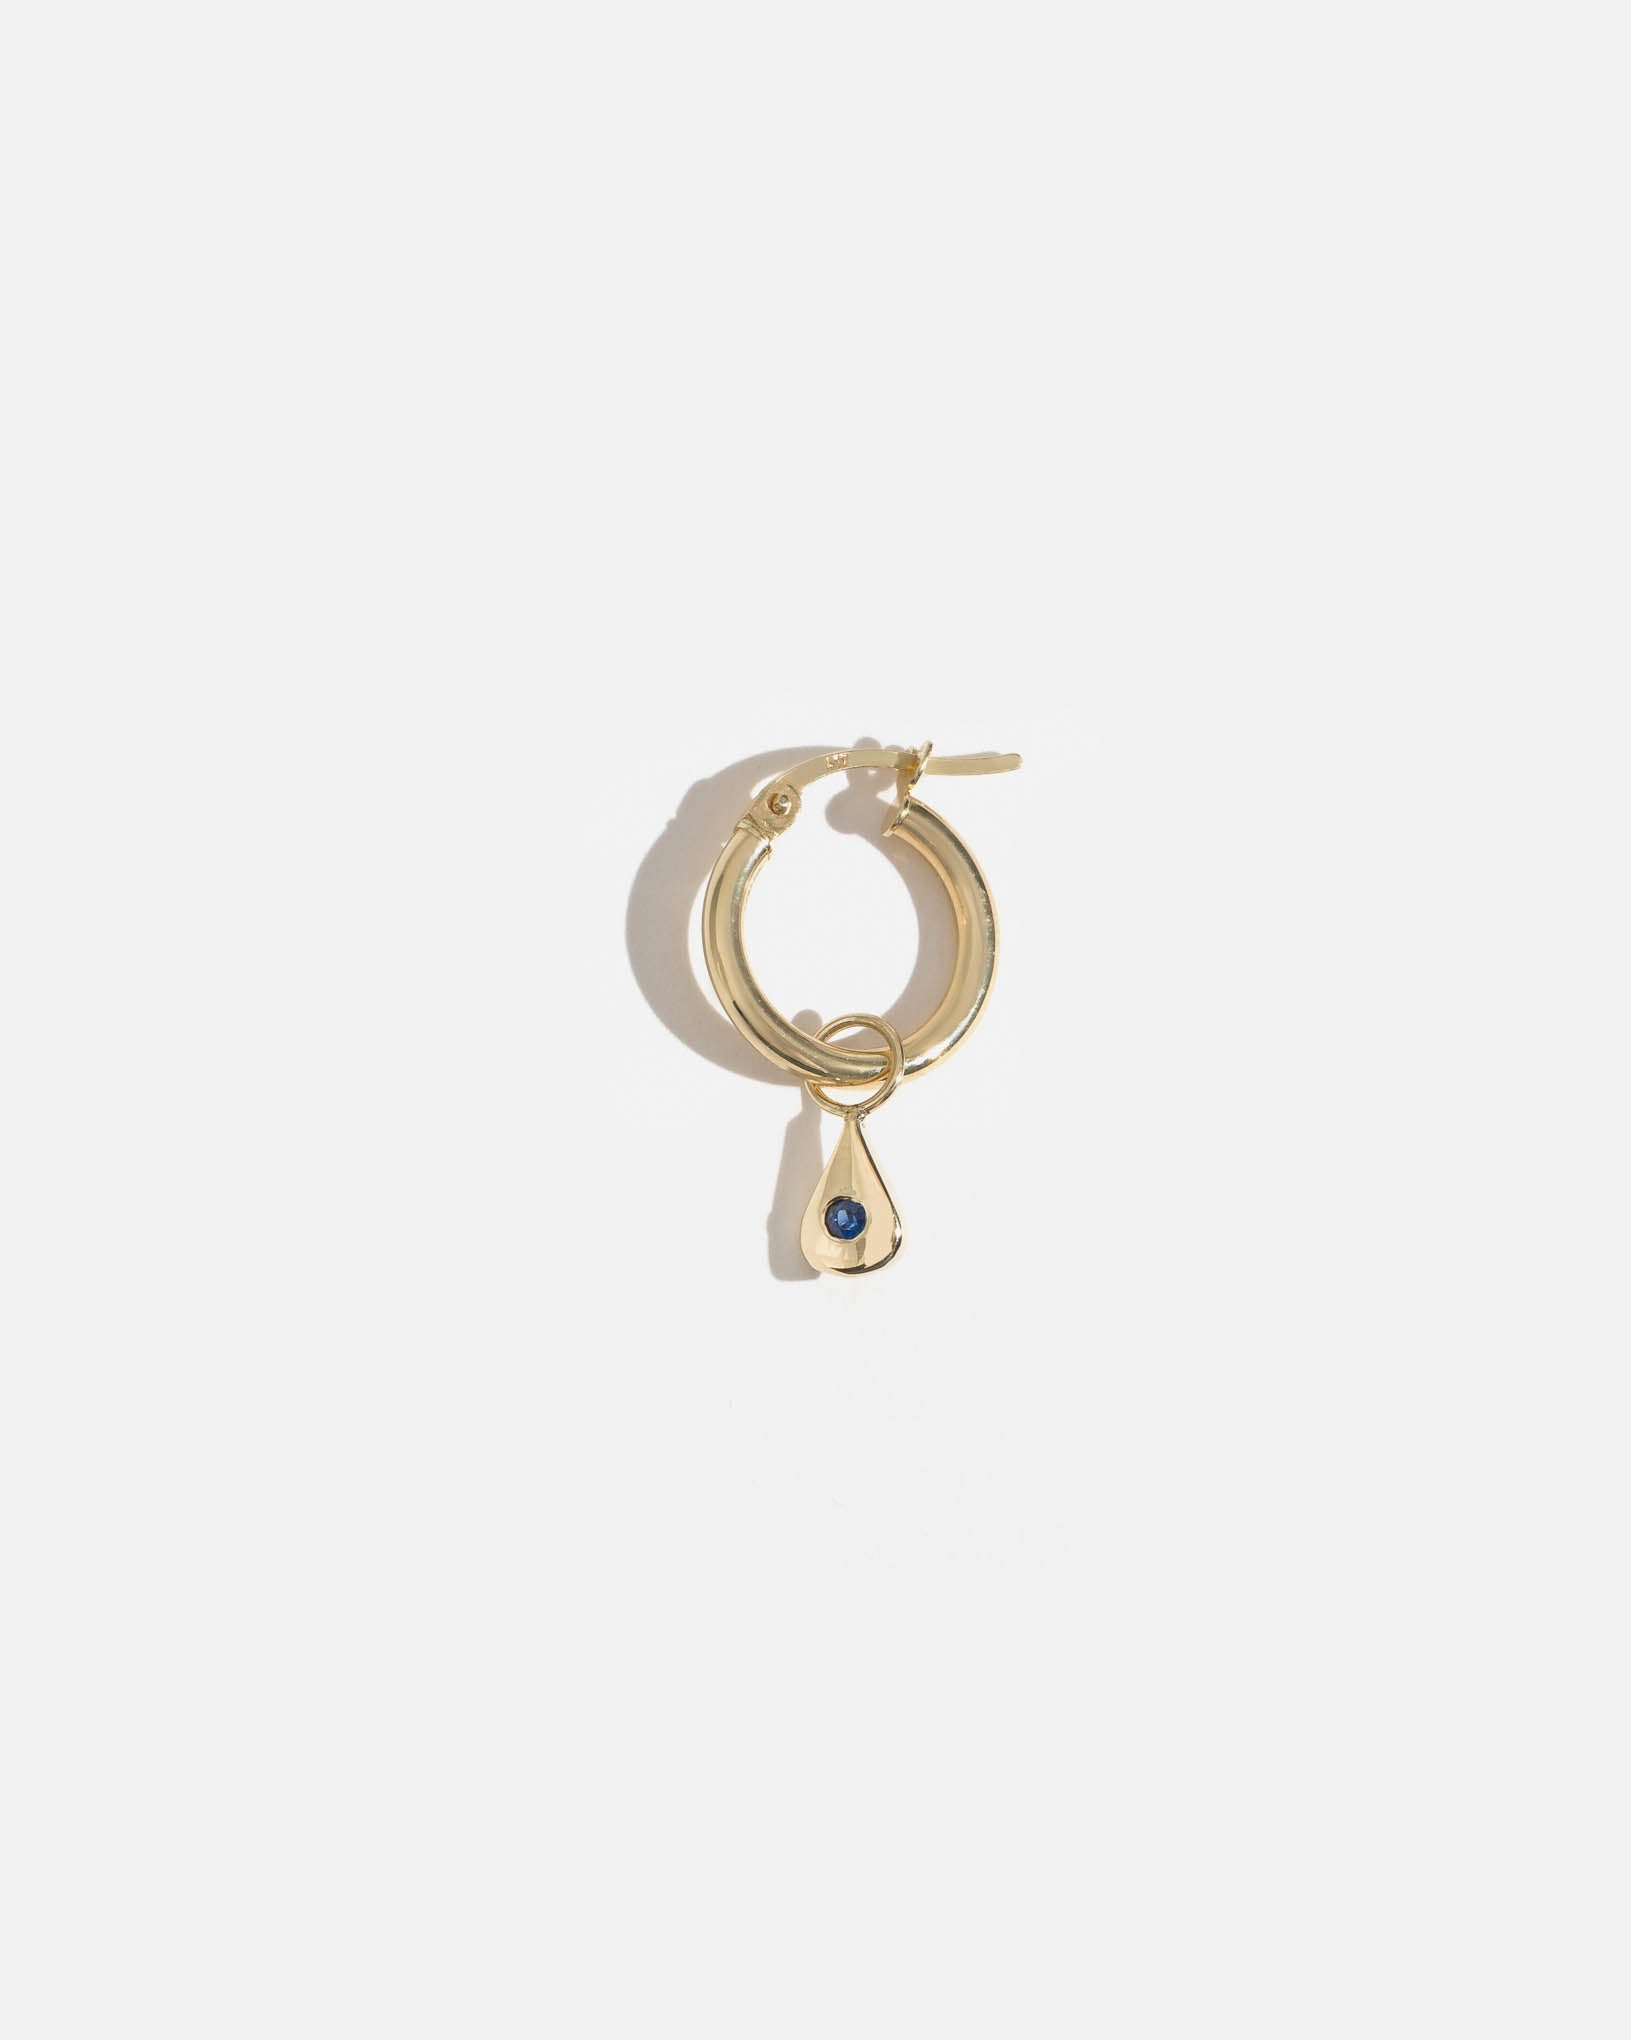 Dew Drop Charm for Hoops in Gold with Sapphire